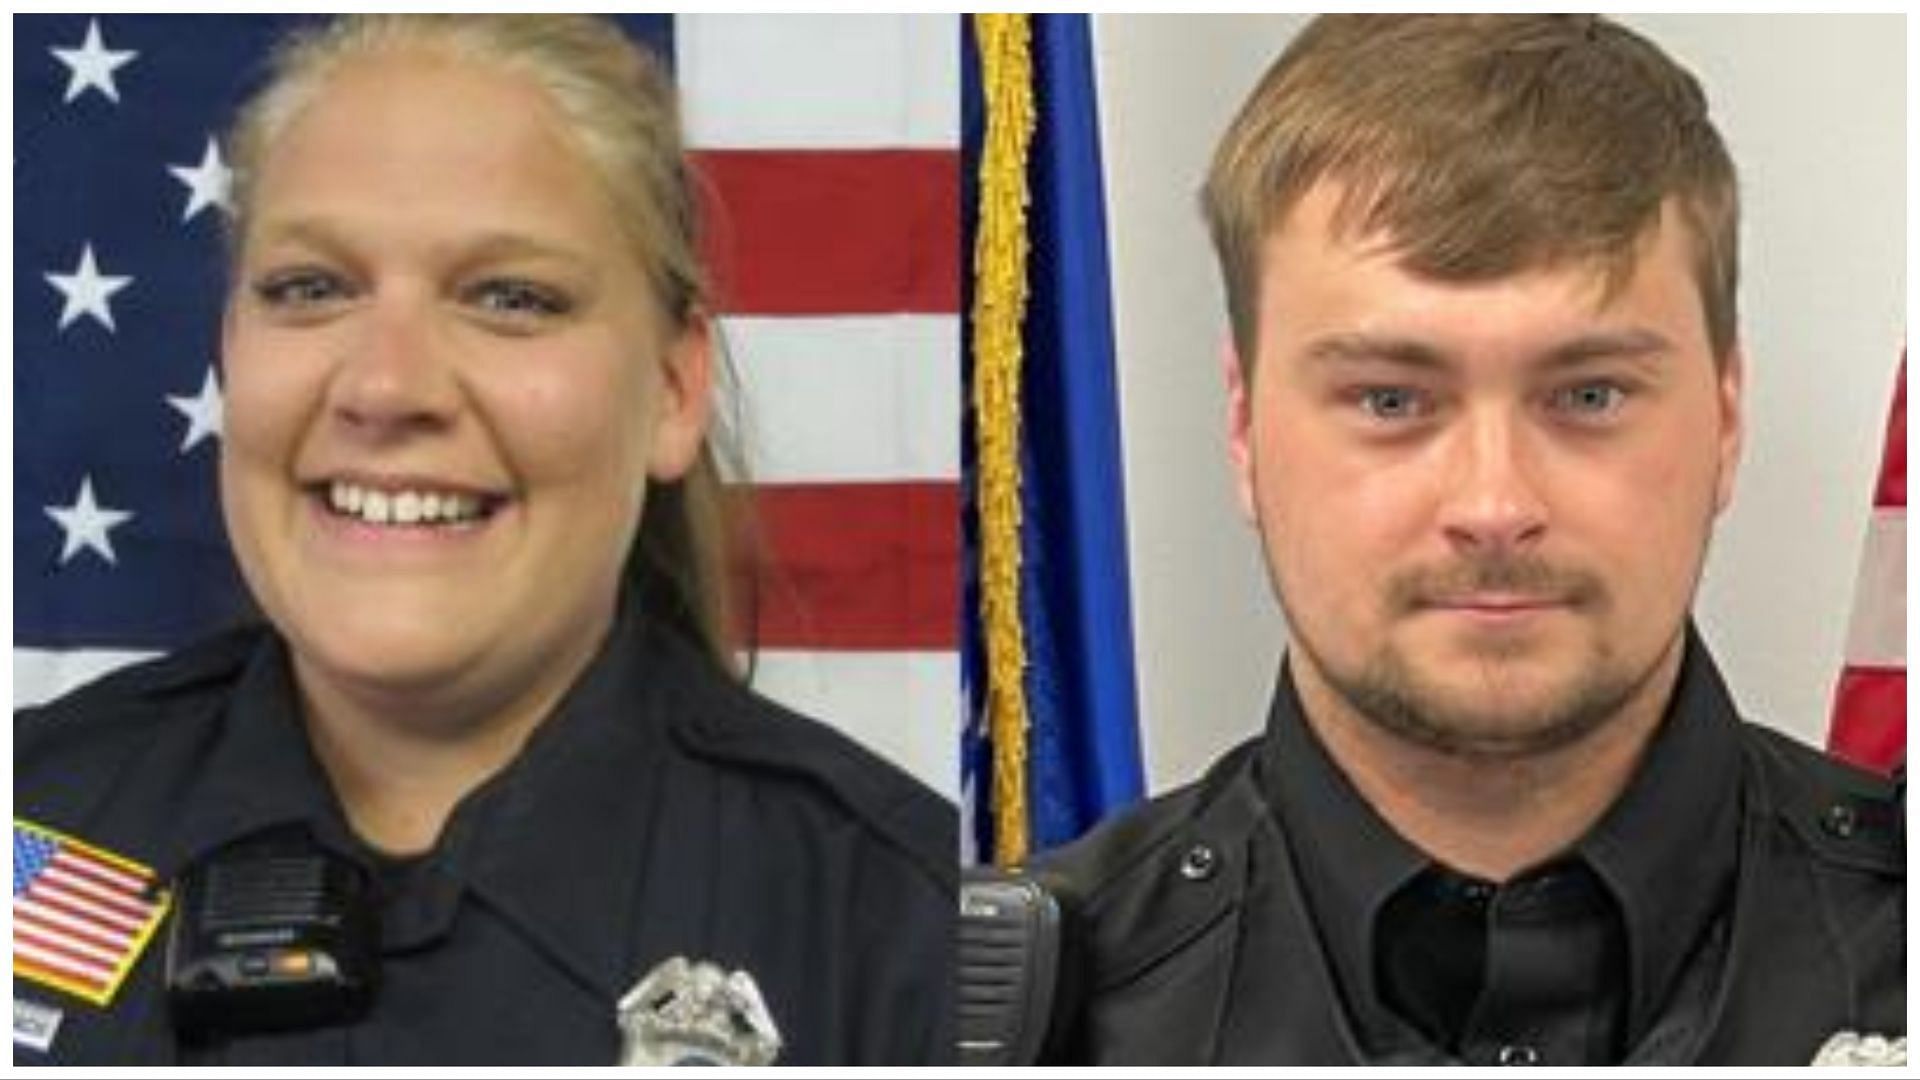 Emily Breidenbach &amp; Hunter Scheel were killed at a traffic stop on April 8 by Perry, (Image via Prog News Serv/Twitter)